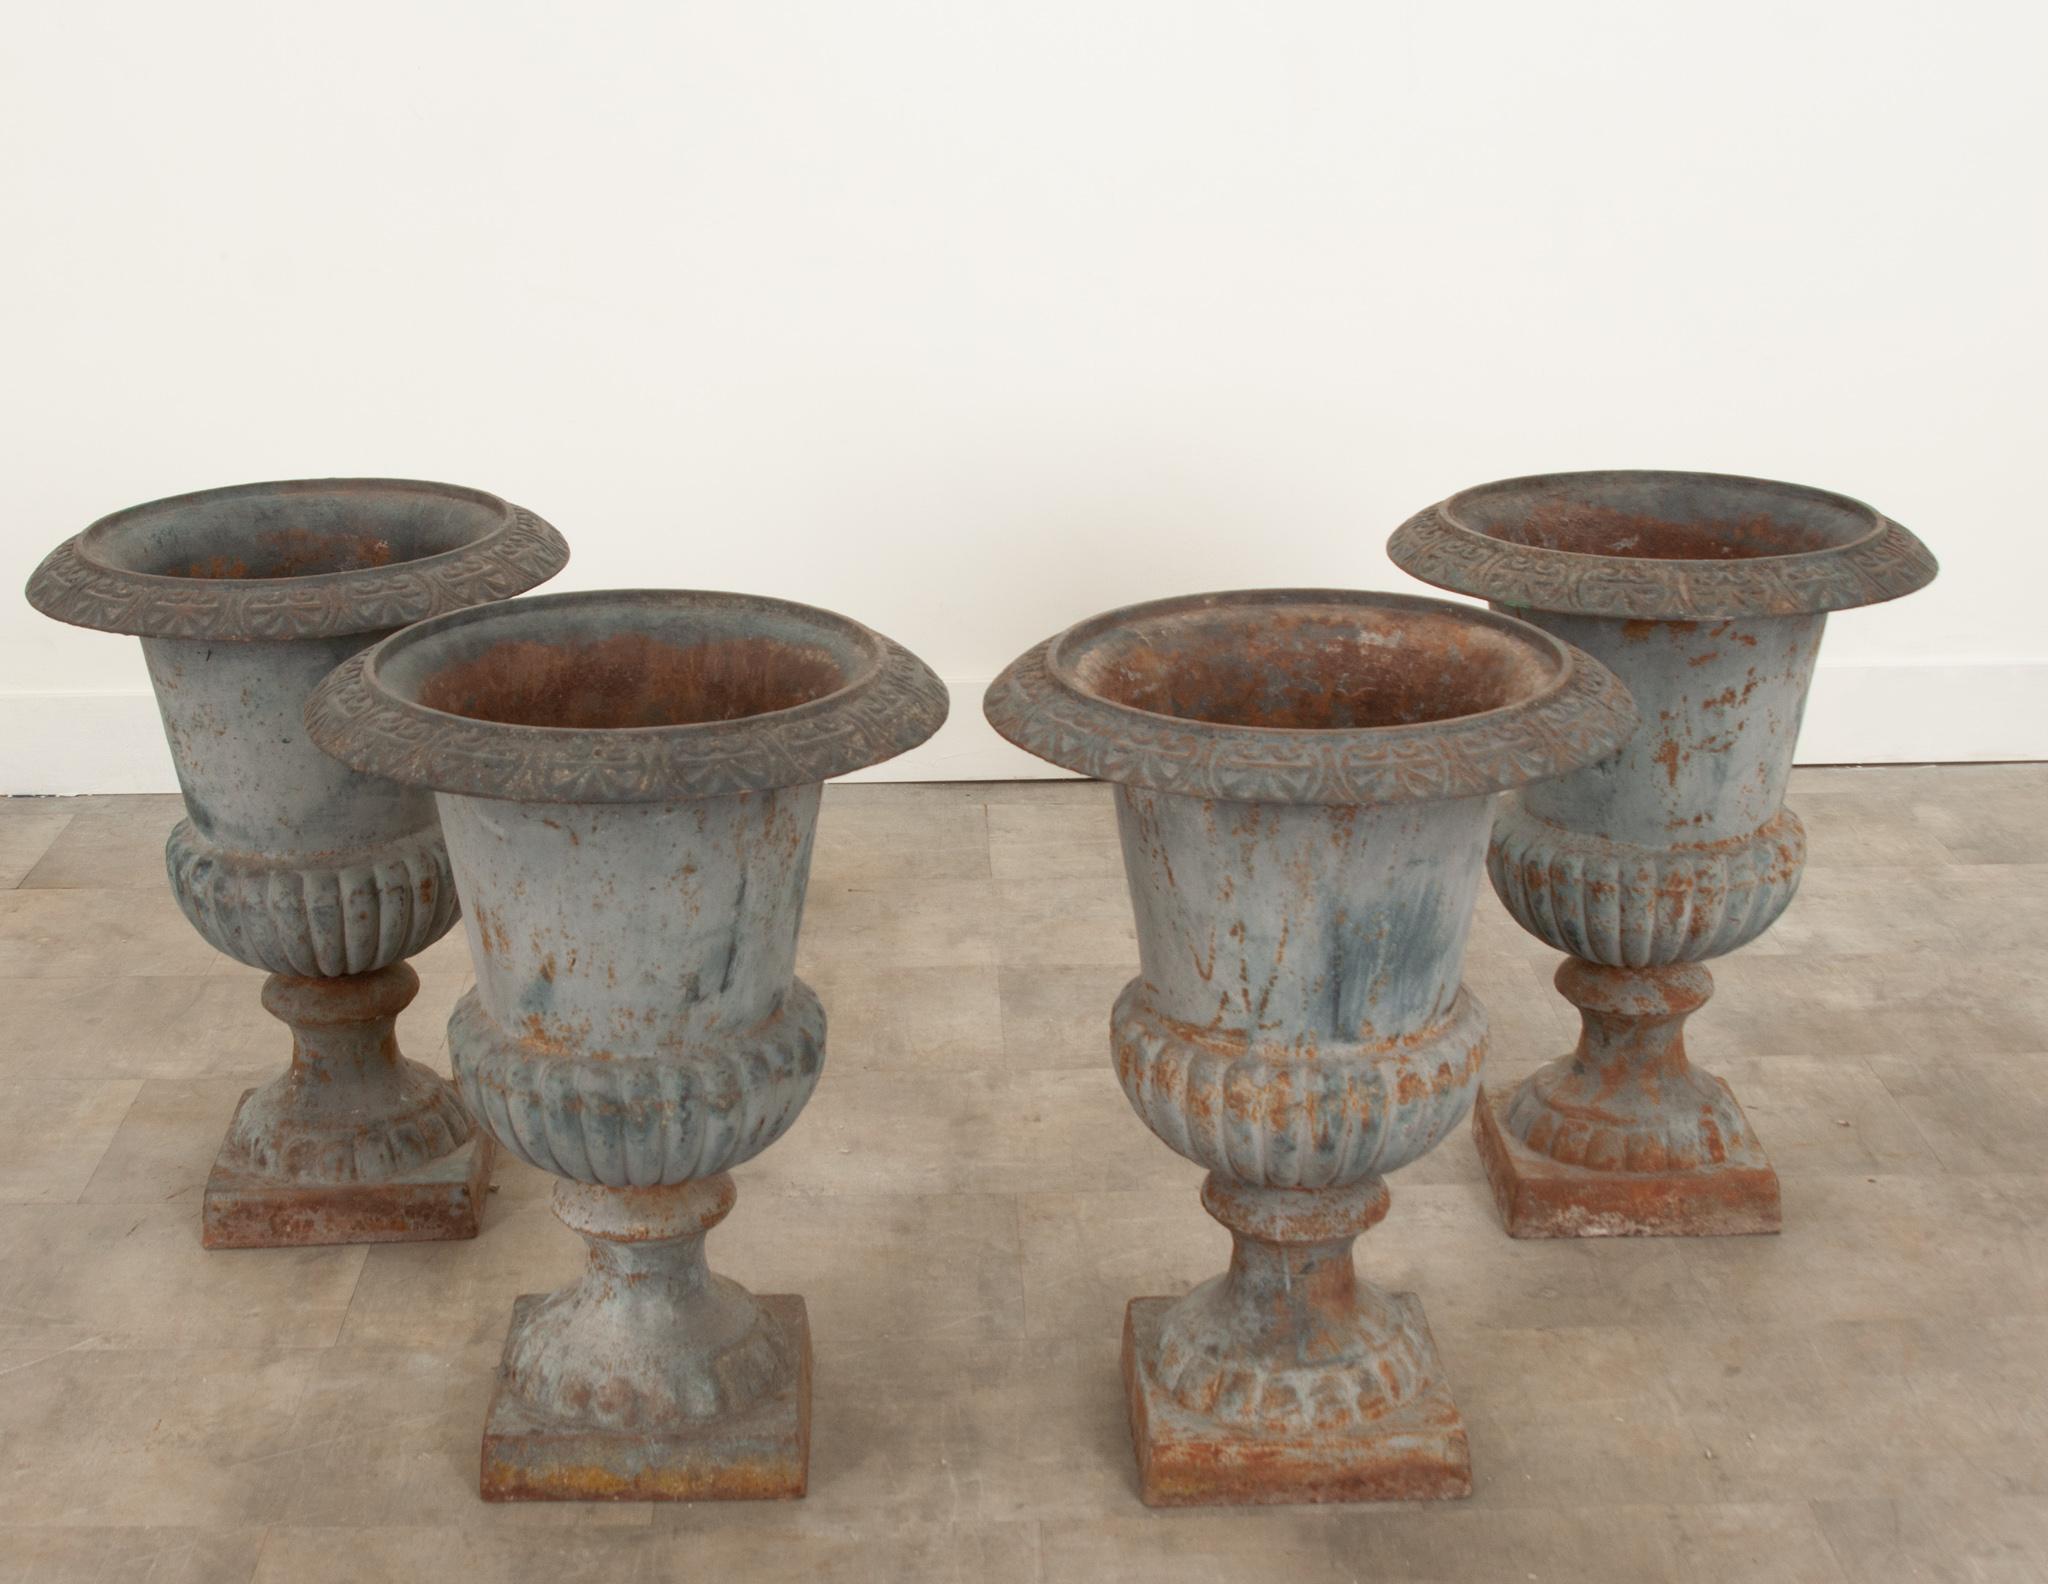 A fantastic set of four iron garden planters from France crafted during the 19th Century. Wonderfully patinated from decades of outdoor exposure and weathering, they add so much character to any space. The basin opening measures 13” diameter and